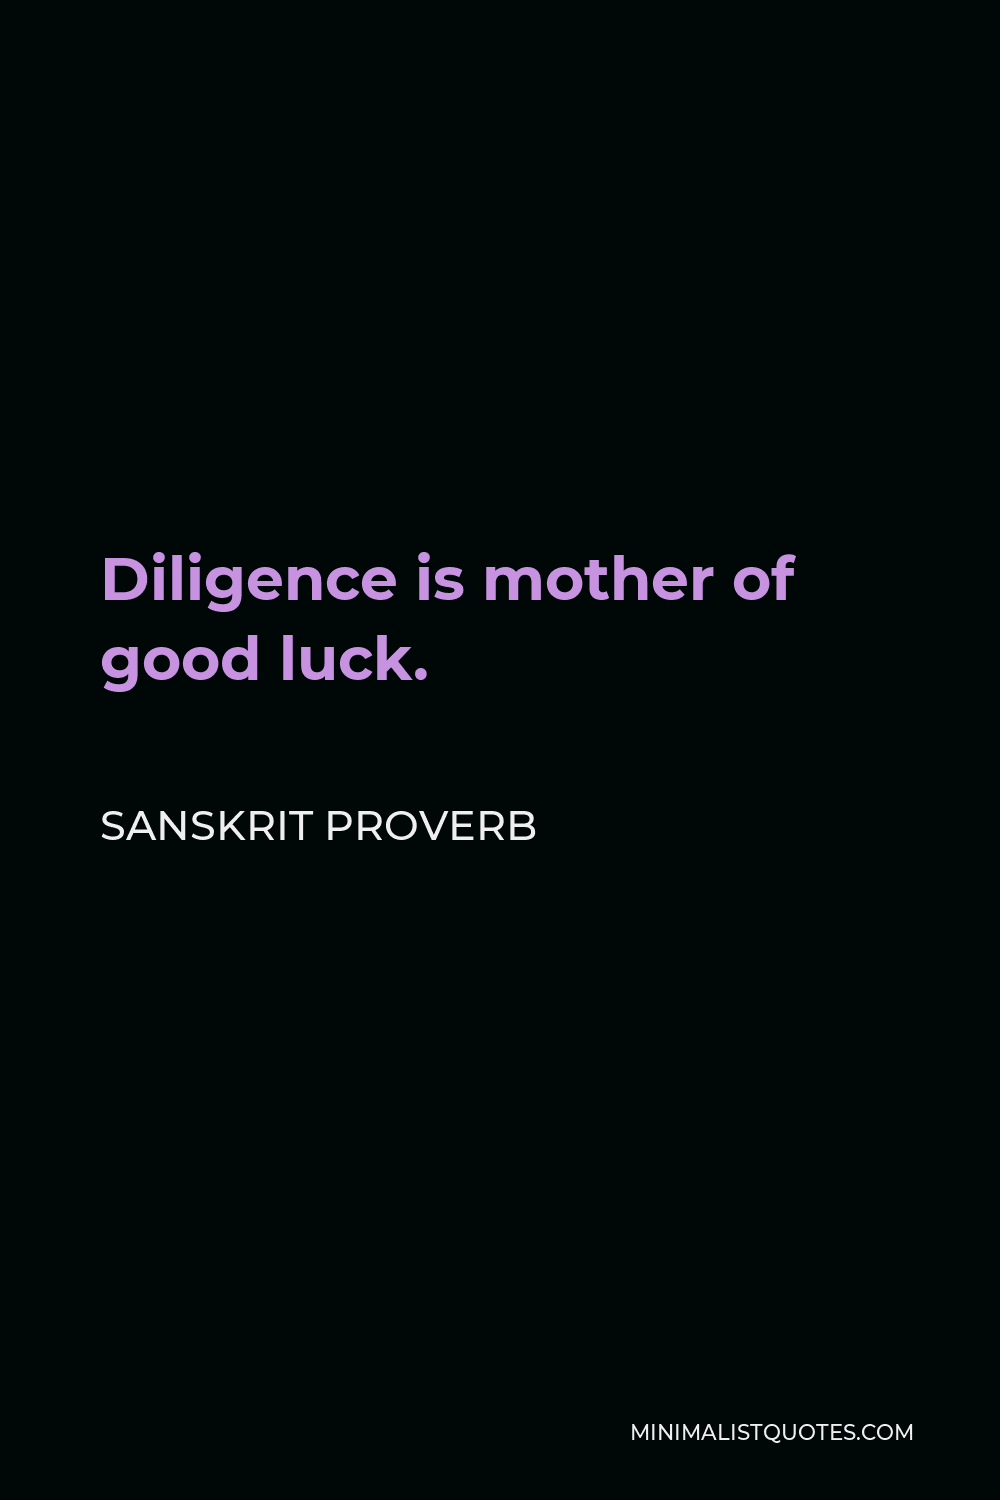 Sanskrit Proverb Quote - Diligence is mother of good luck.